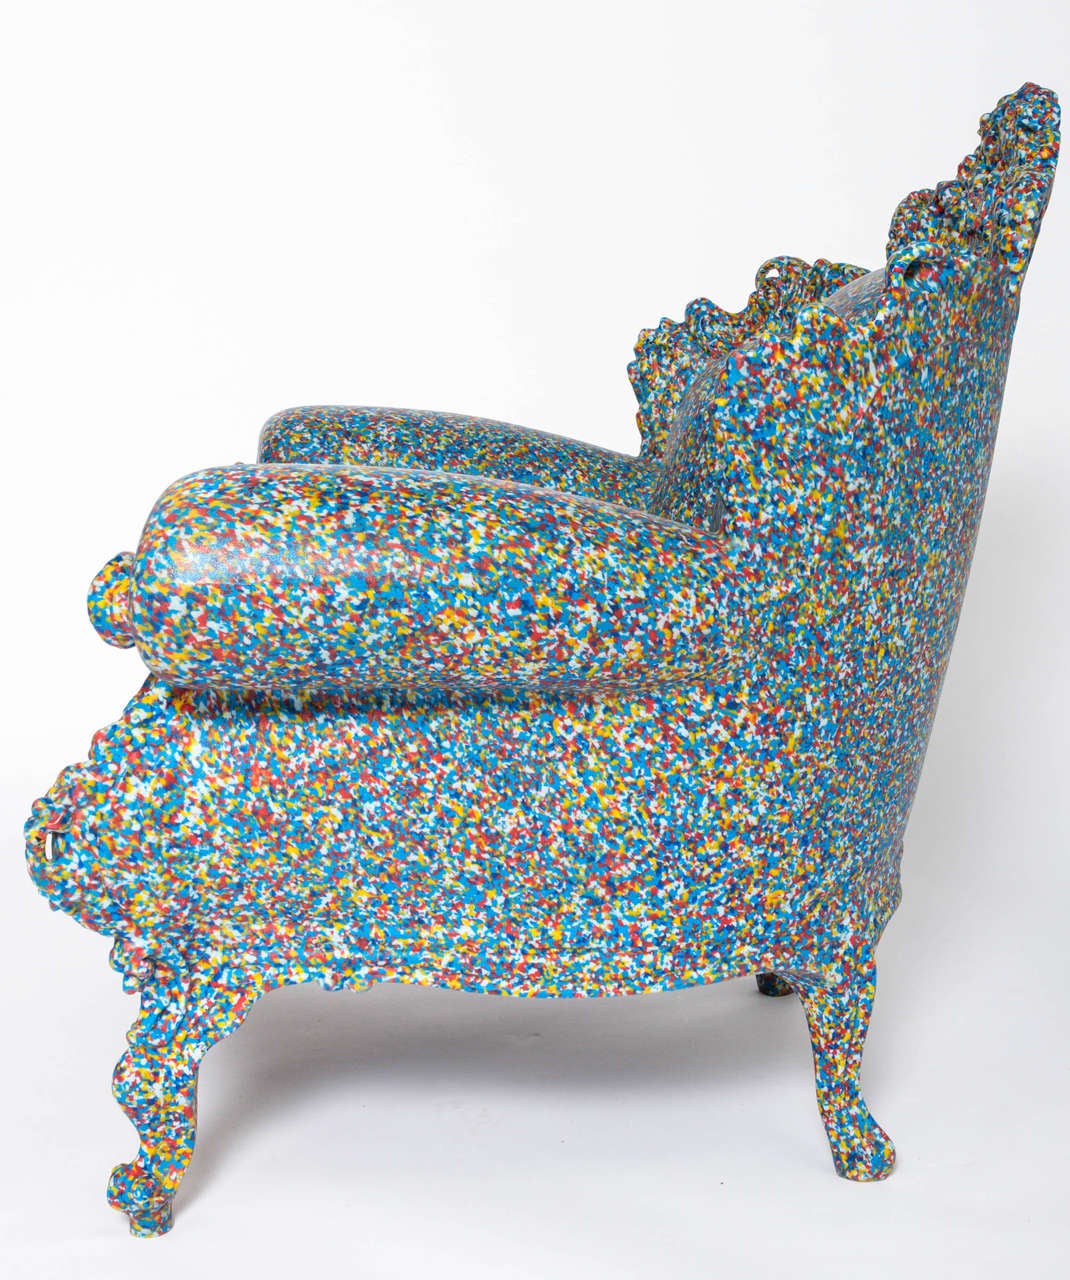 An armchair, the proust, by Alessandro Mendini.
Multi coloured resin base.
Originally designed in 1978 for Studio Alchimia, Milan.
Produced by Magis.
Italy, 2011
Measures: 105 cms x 104 cms x 90 cms.

The “Proust” chair is the most famous